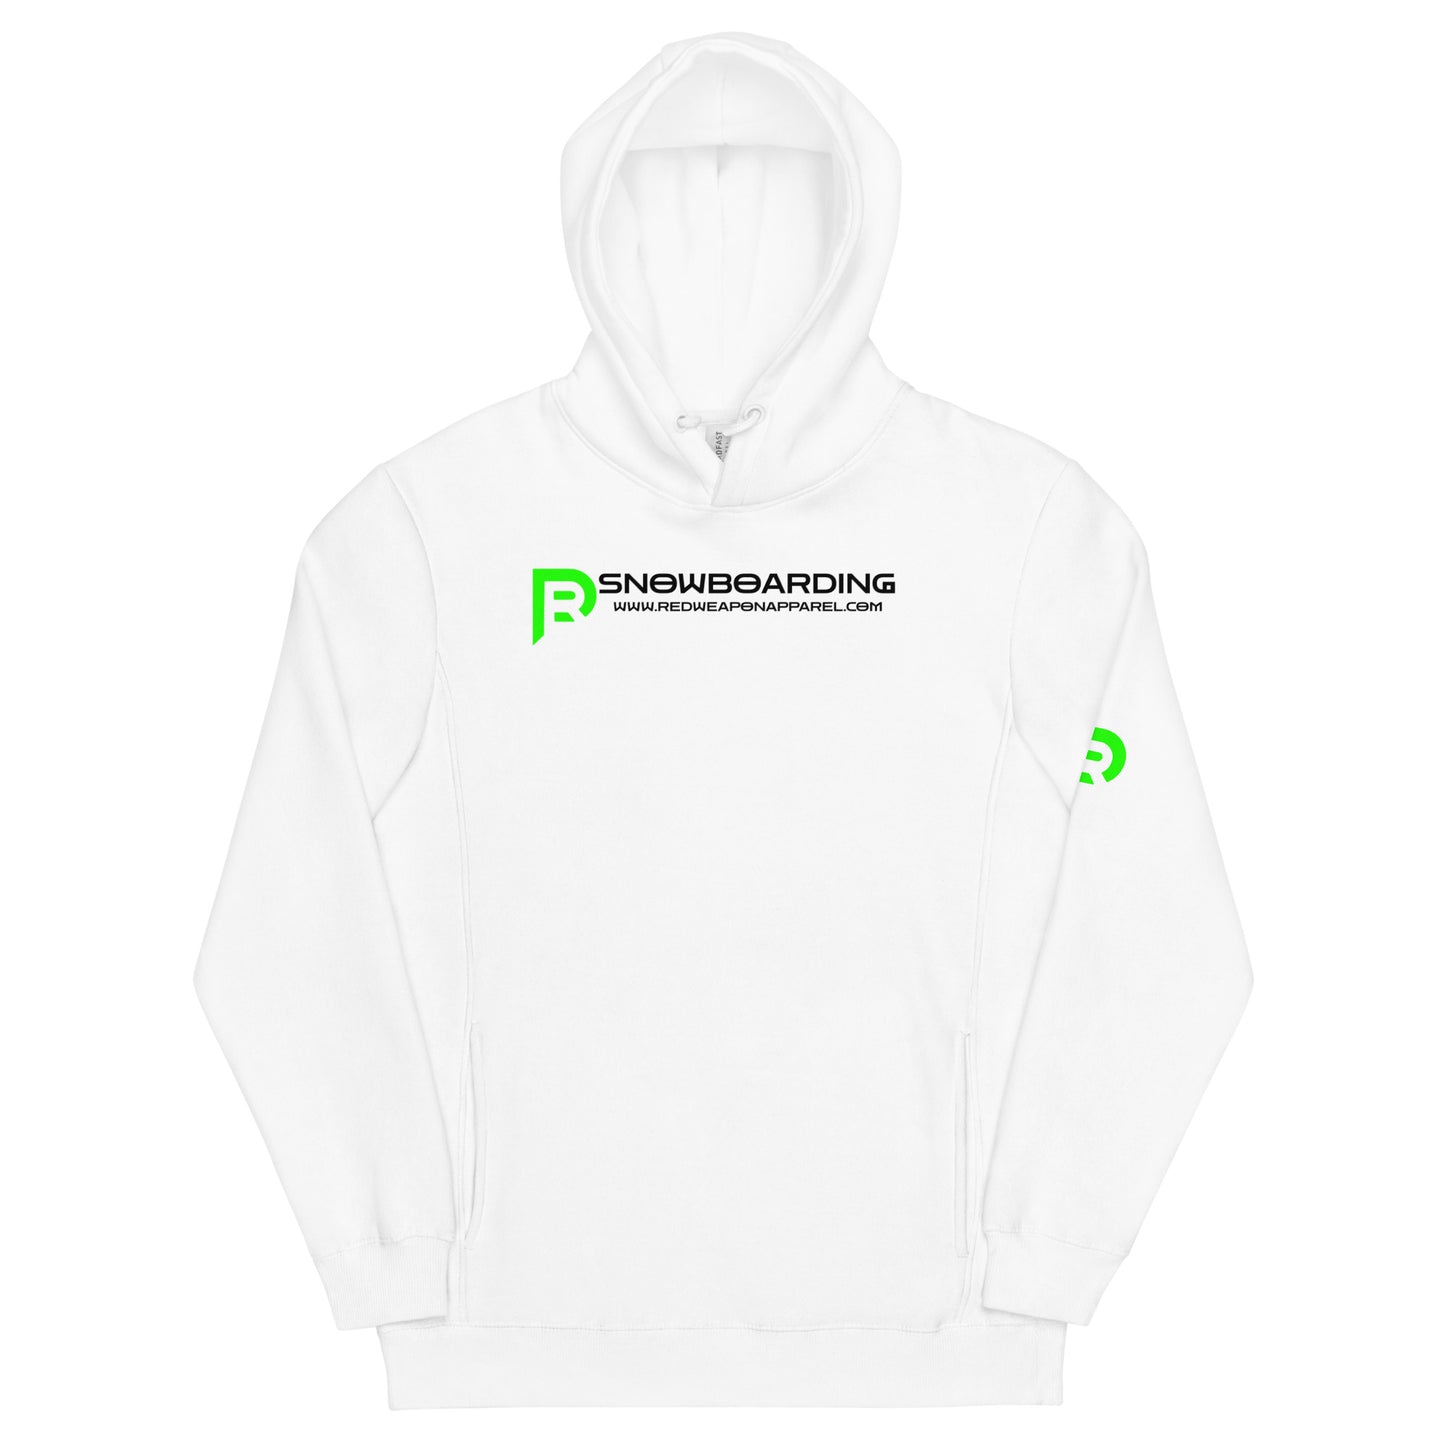 Red Weapon Snowboarding Fashion Hoodie